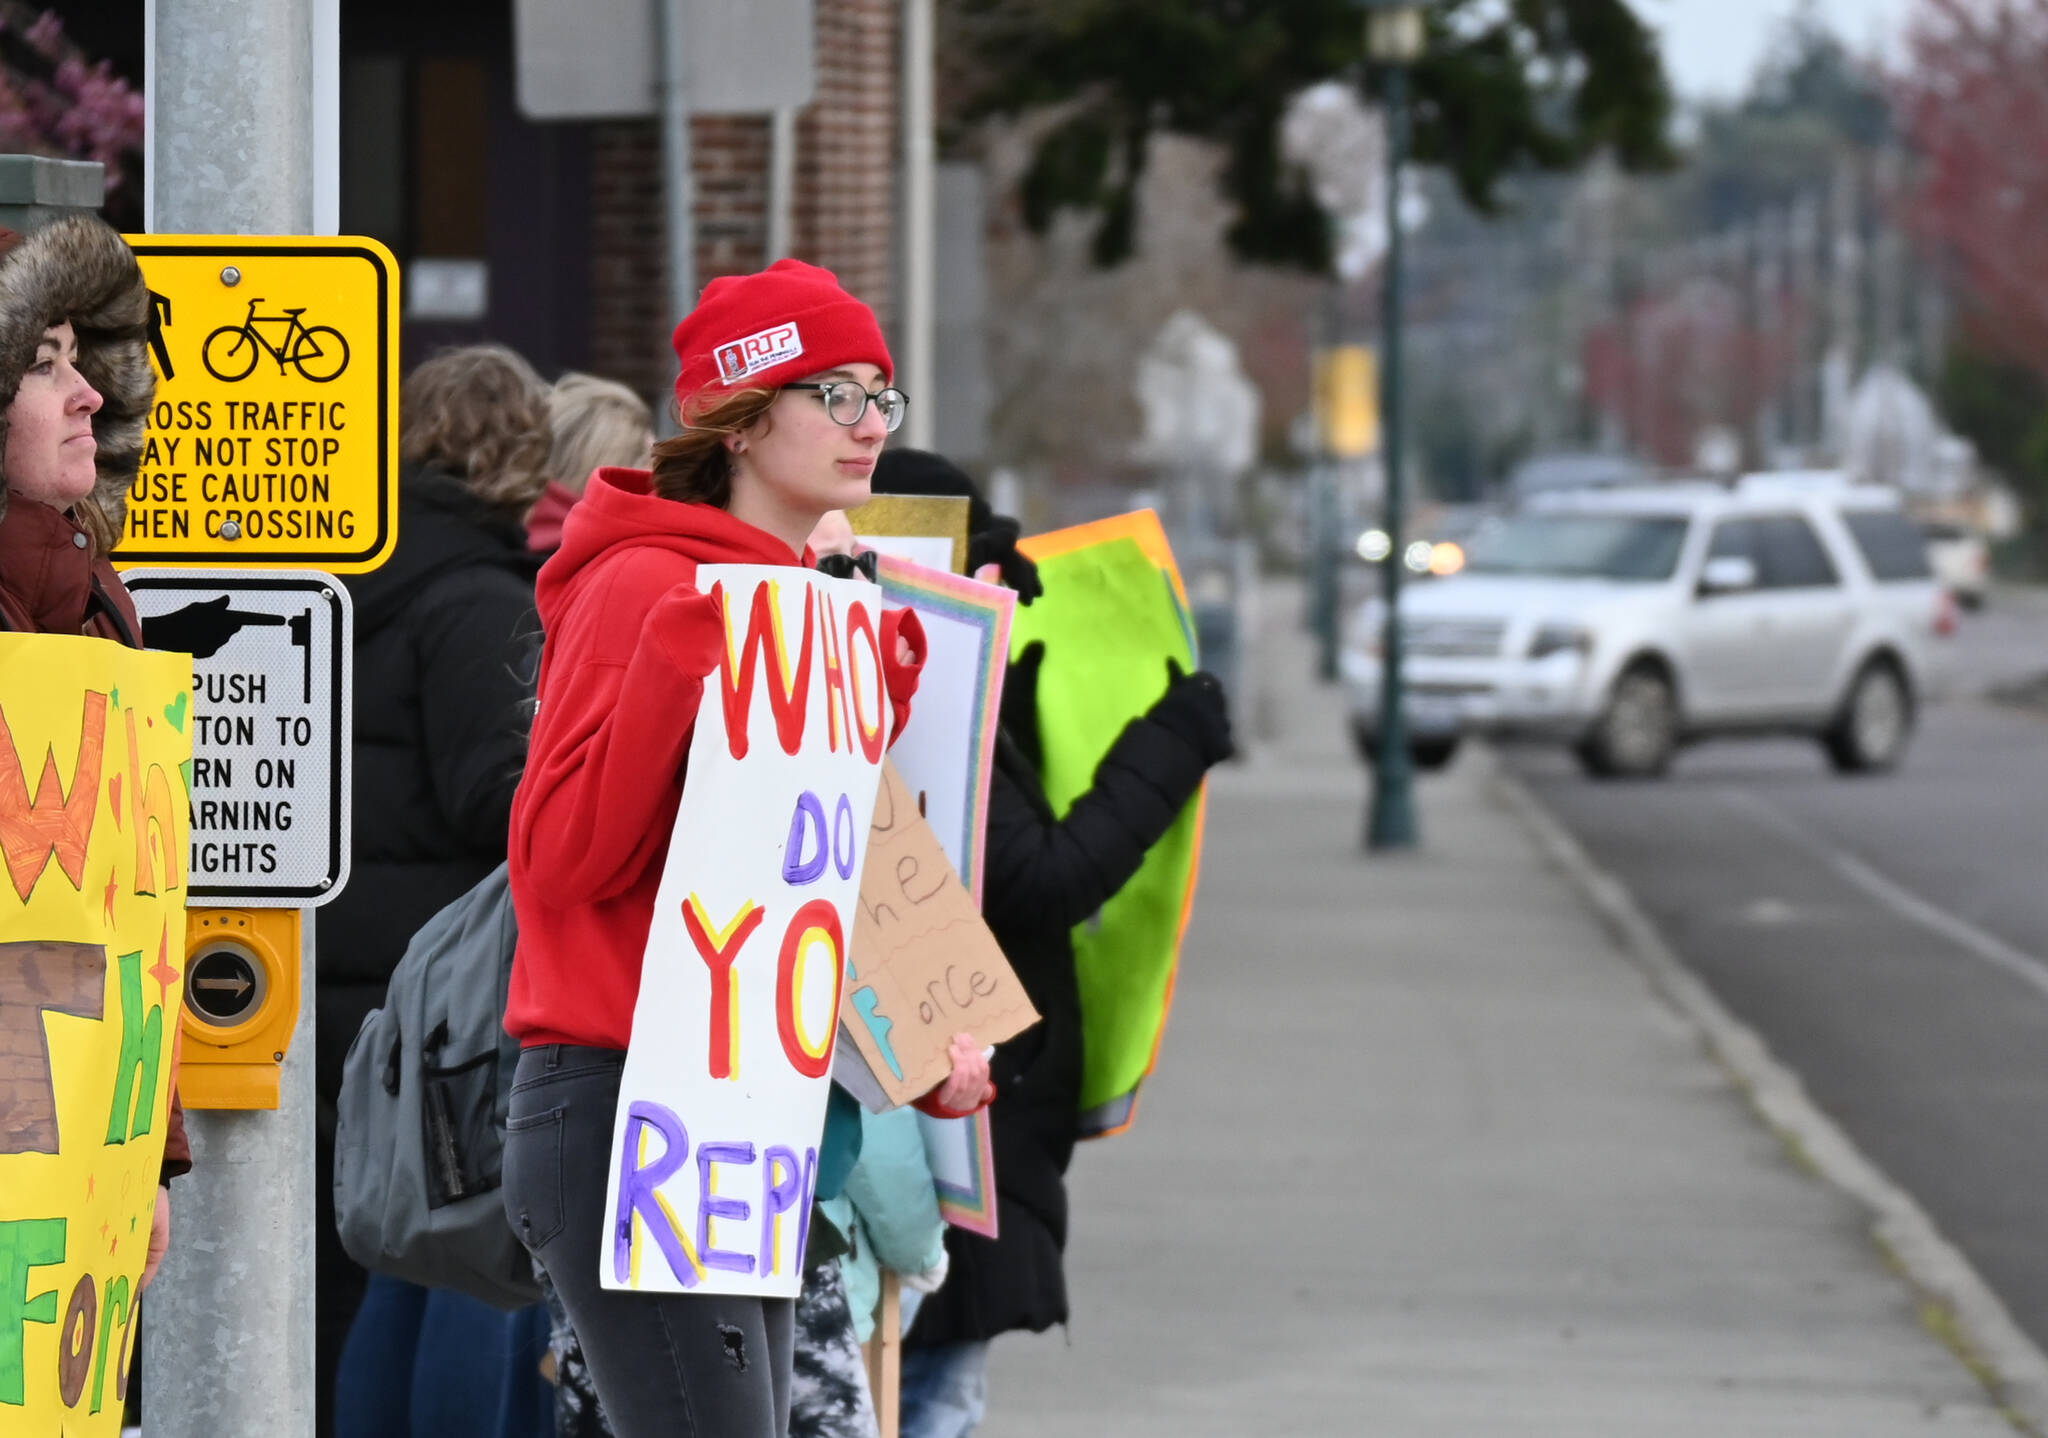 Sequim Gazette photo by Michael Dashiell
Sequim High student Georgia Bullard protests the reconfiguration of Sequim schools at the North Sequim Avenue and Fir Street intersection on April 17. Bullard helped organize Sequim Community Against Realignment and three Monday protests.